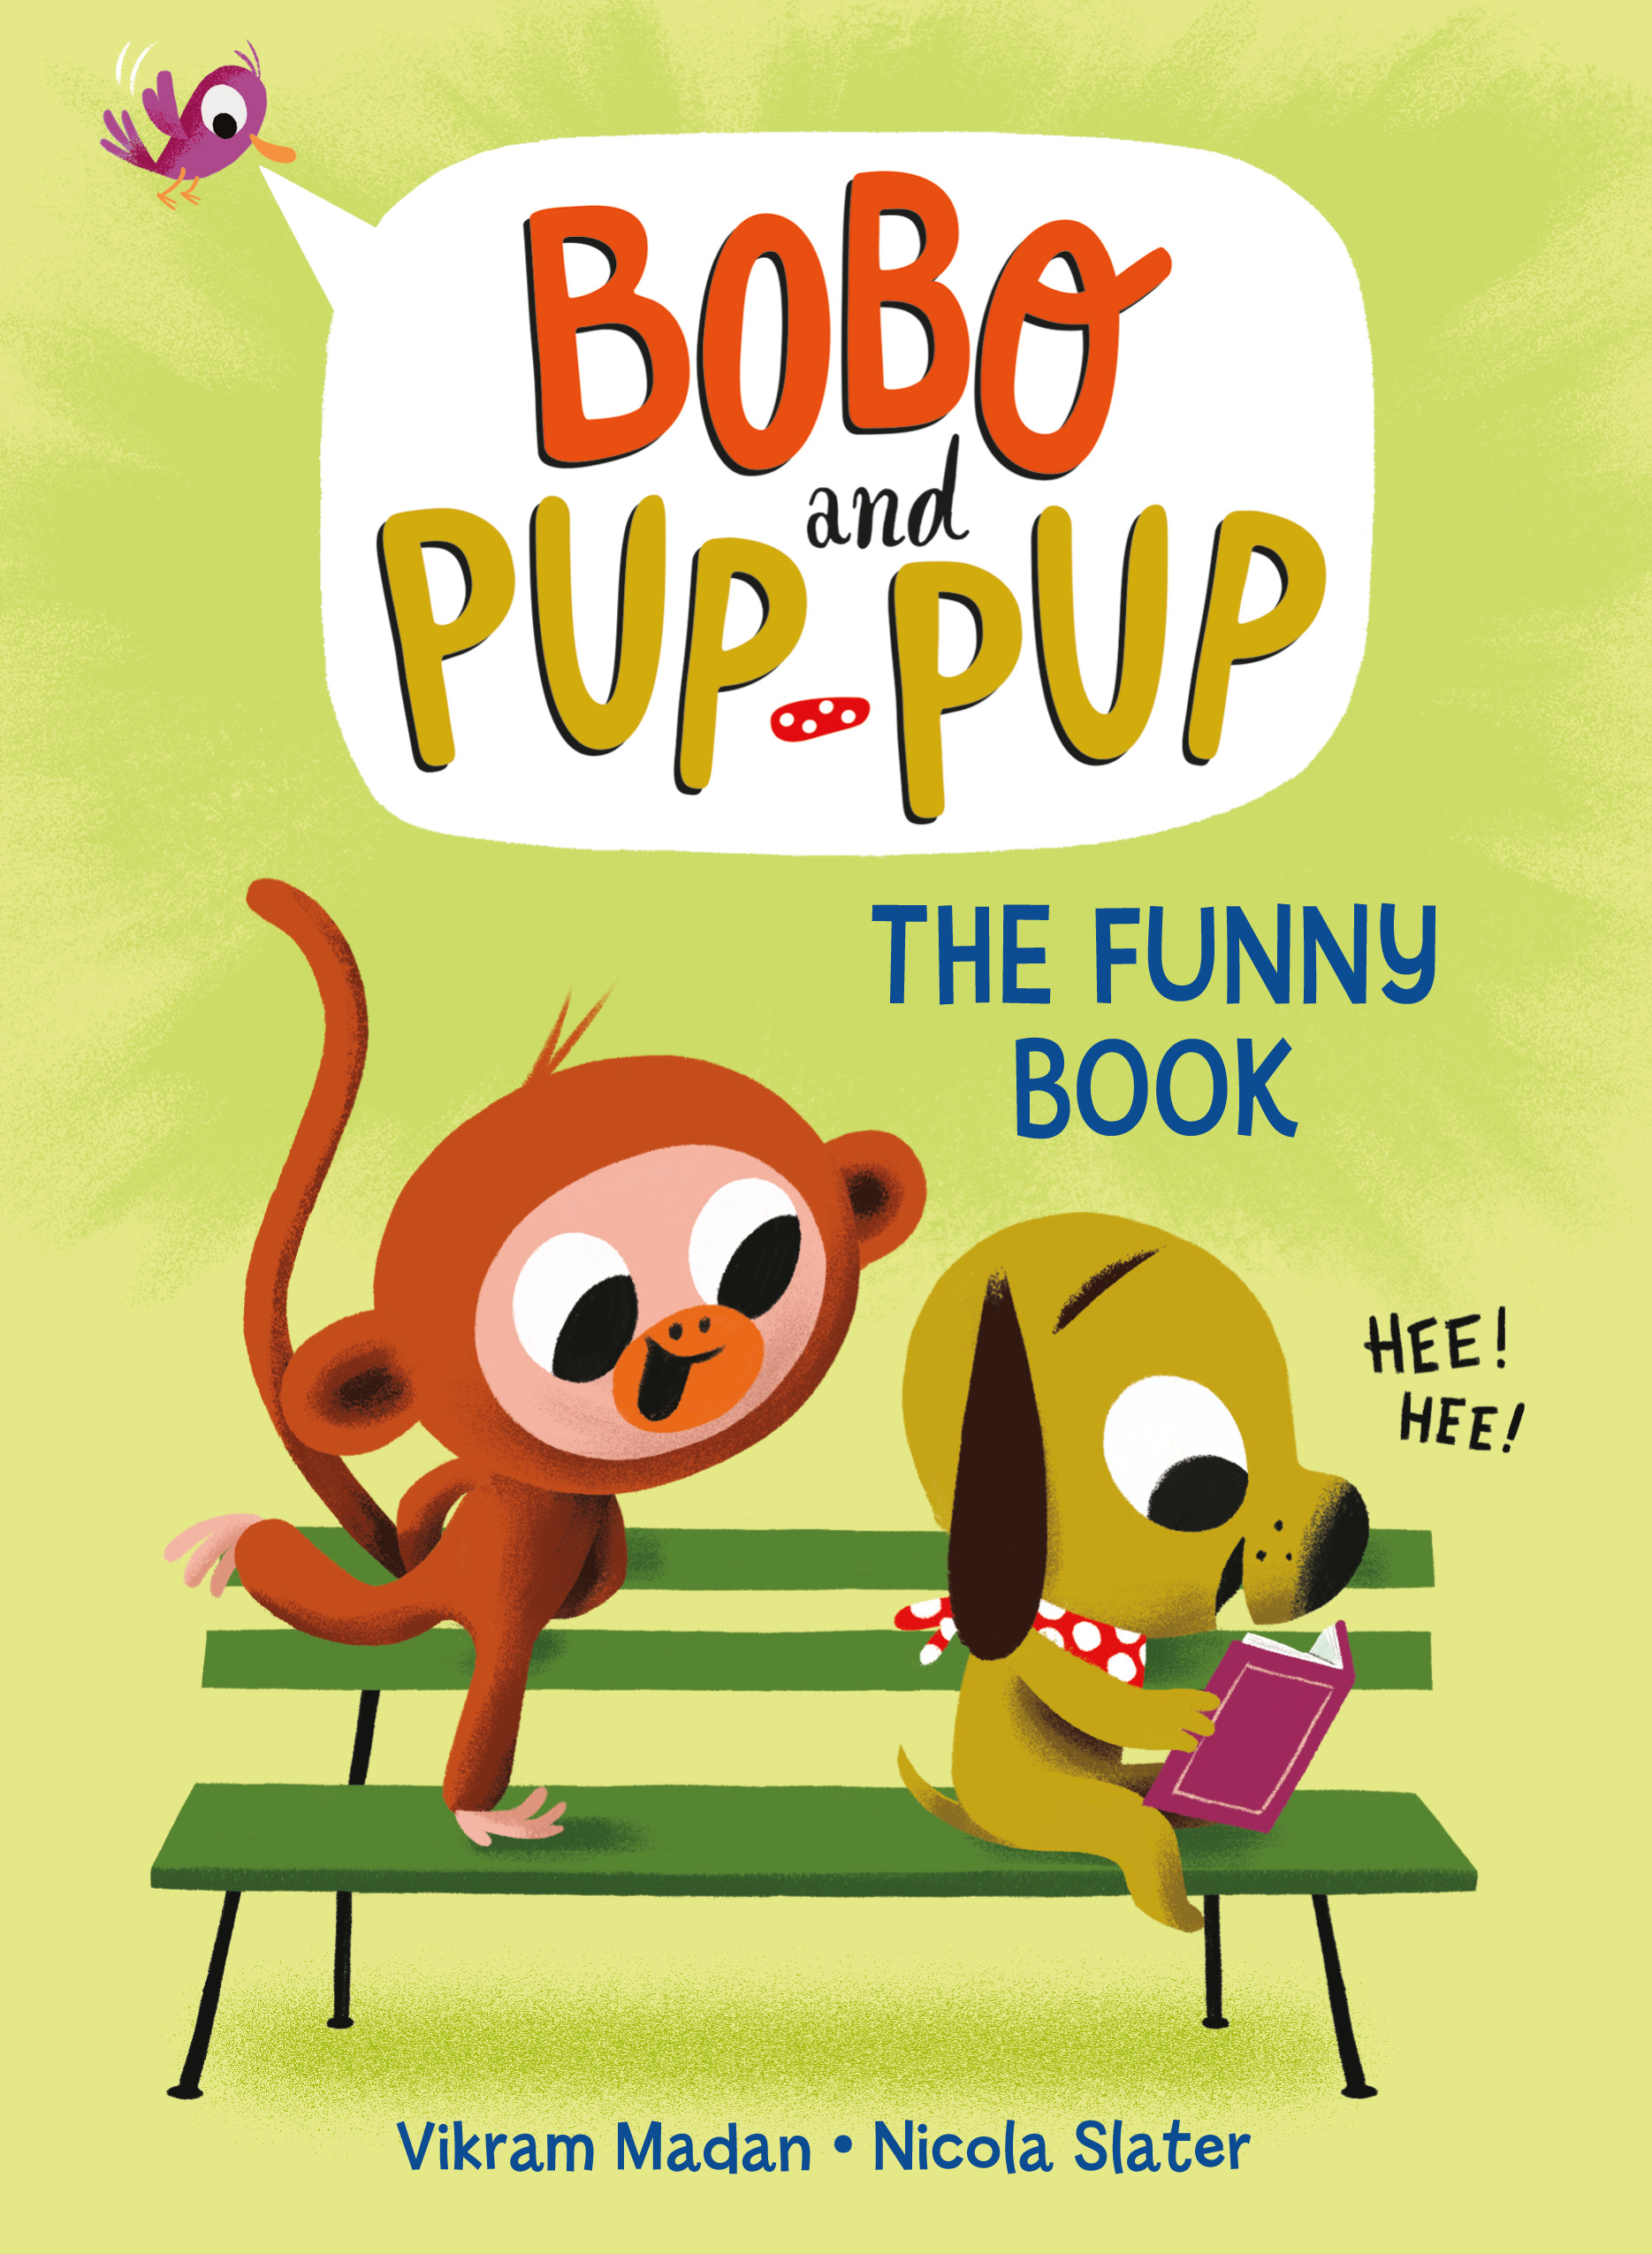 The Funny Book (Bobo and Pup-Pup) : (A Graphic Novel) | Madan, Vikram (Auteur) | Slater, Nicola (Illustrateur)